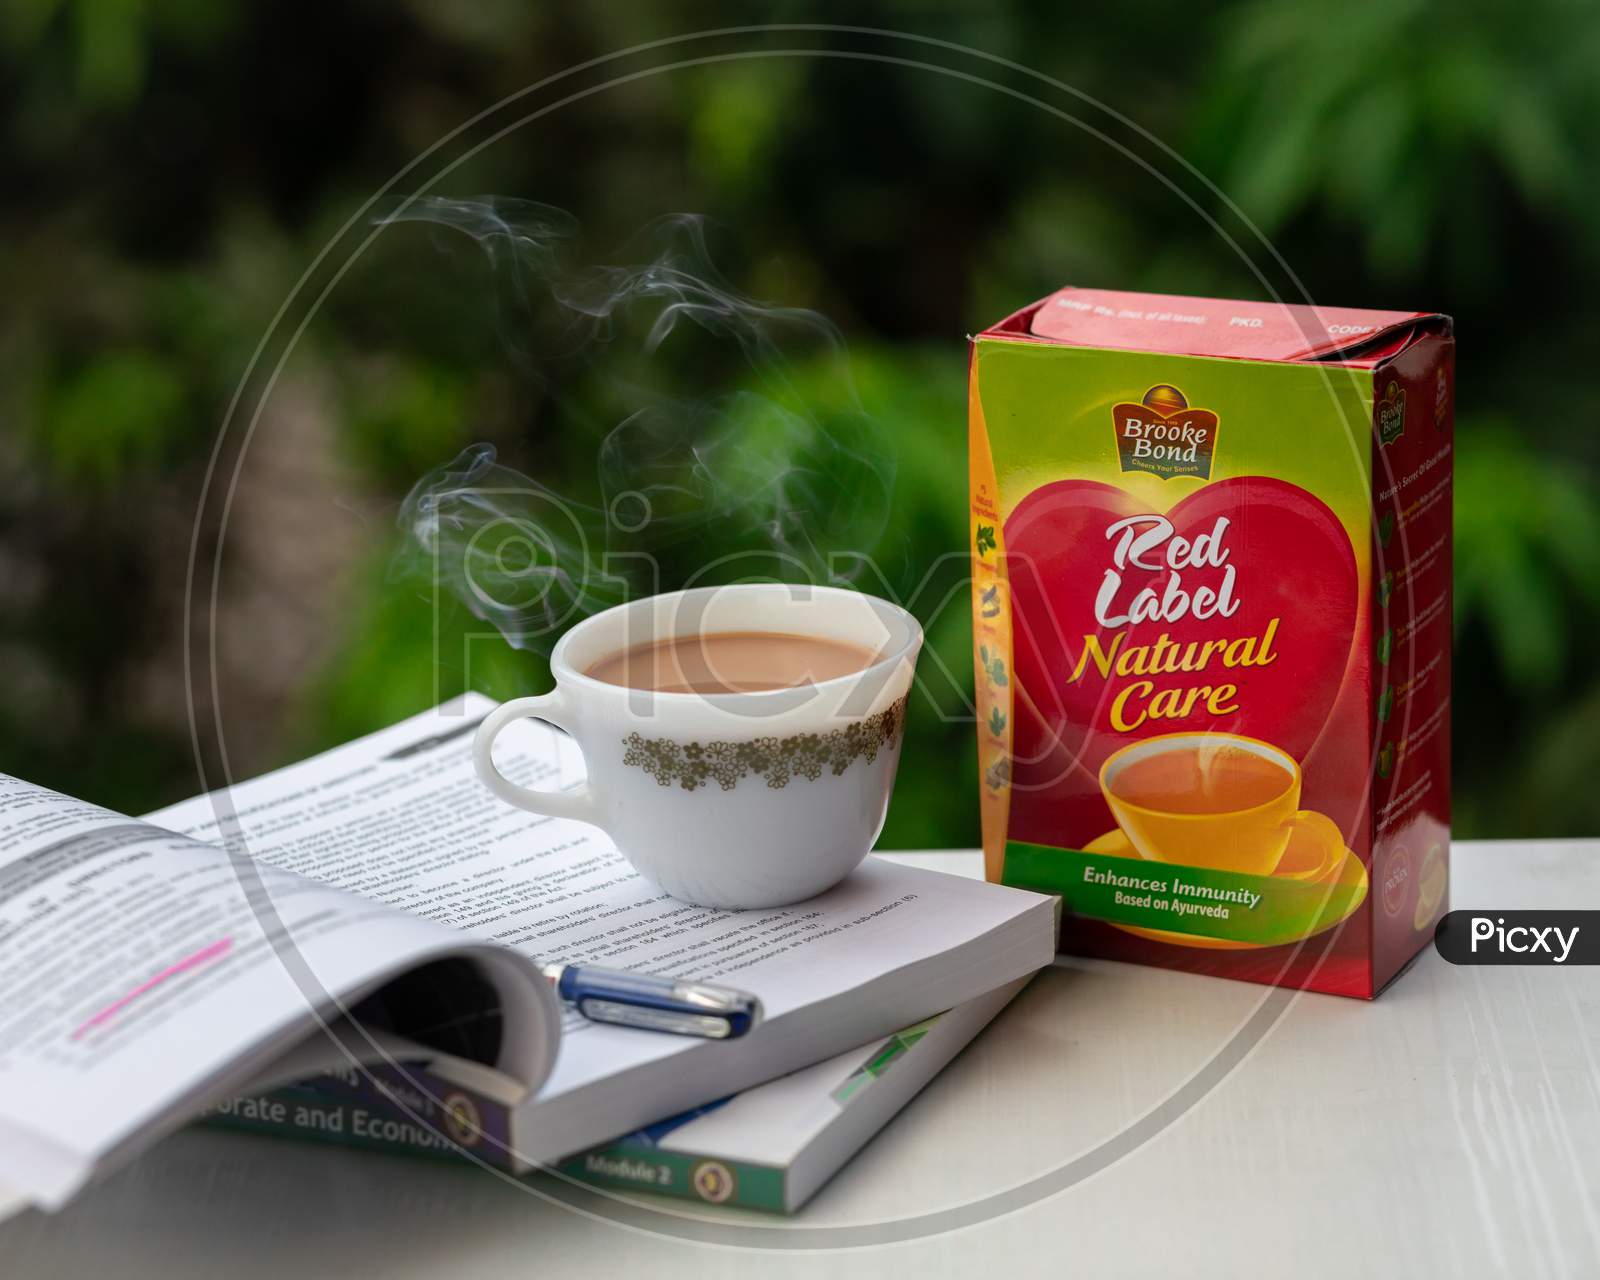 Red label natural care tea and books 